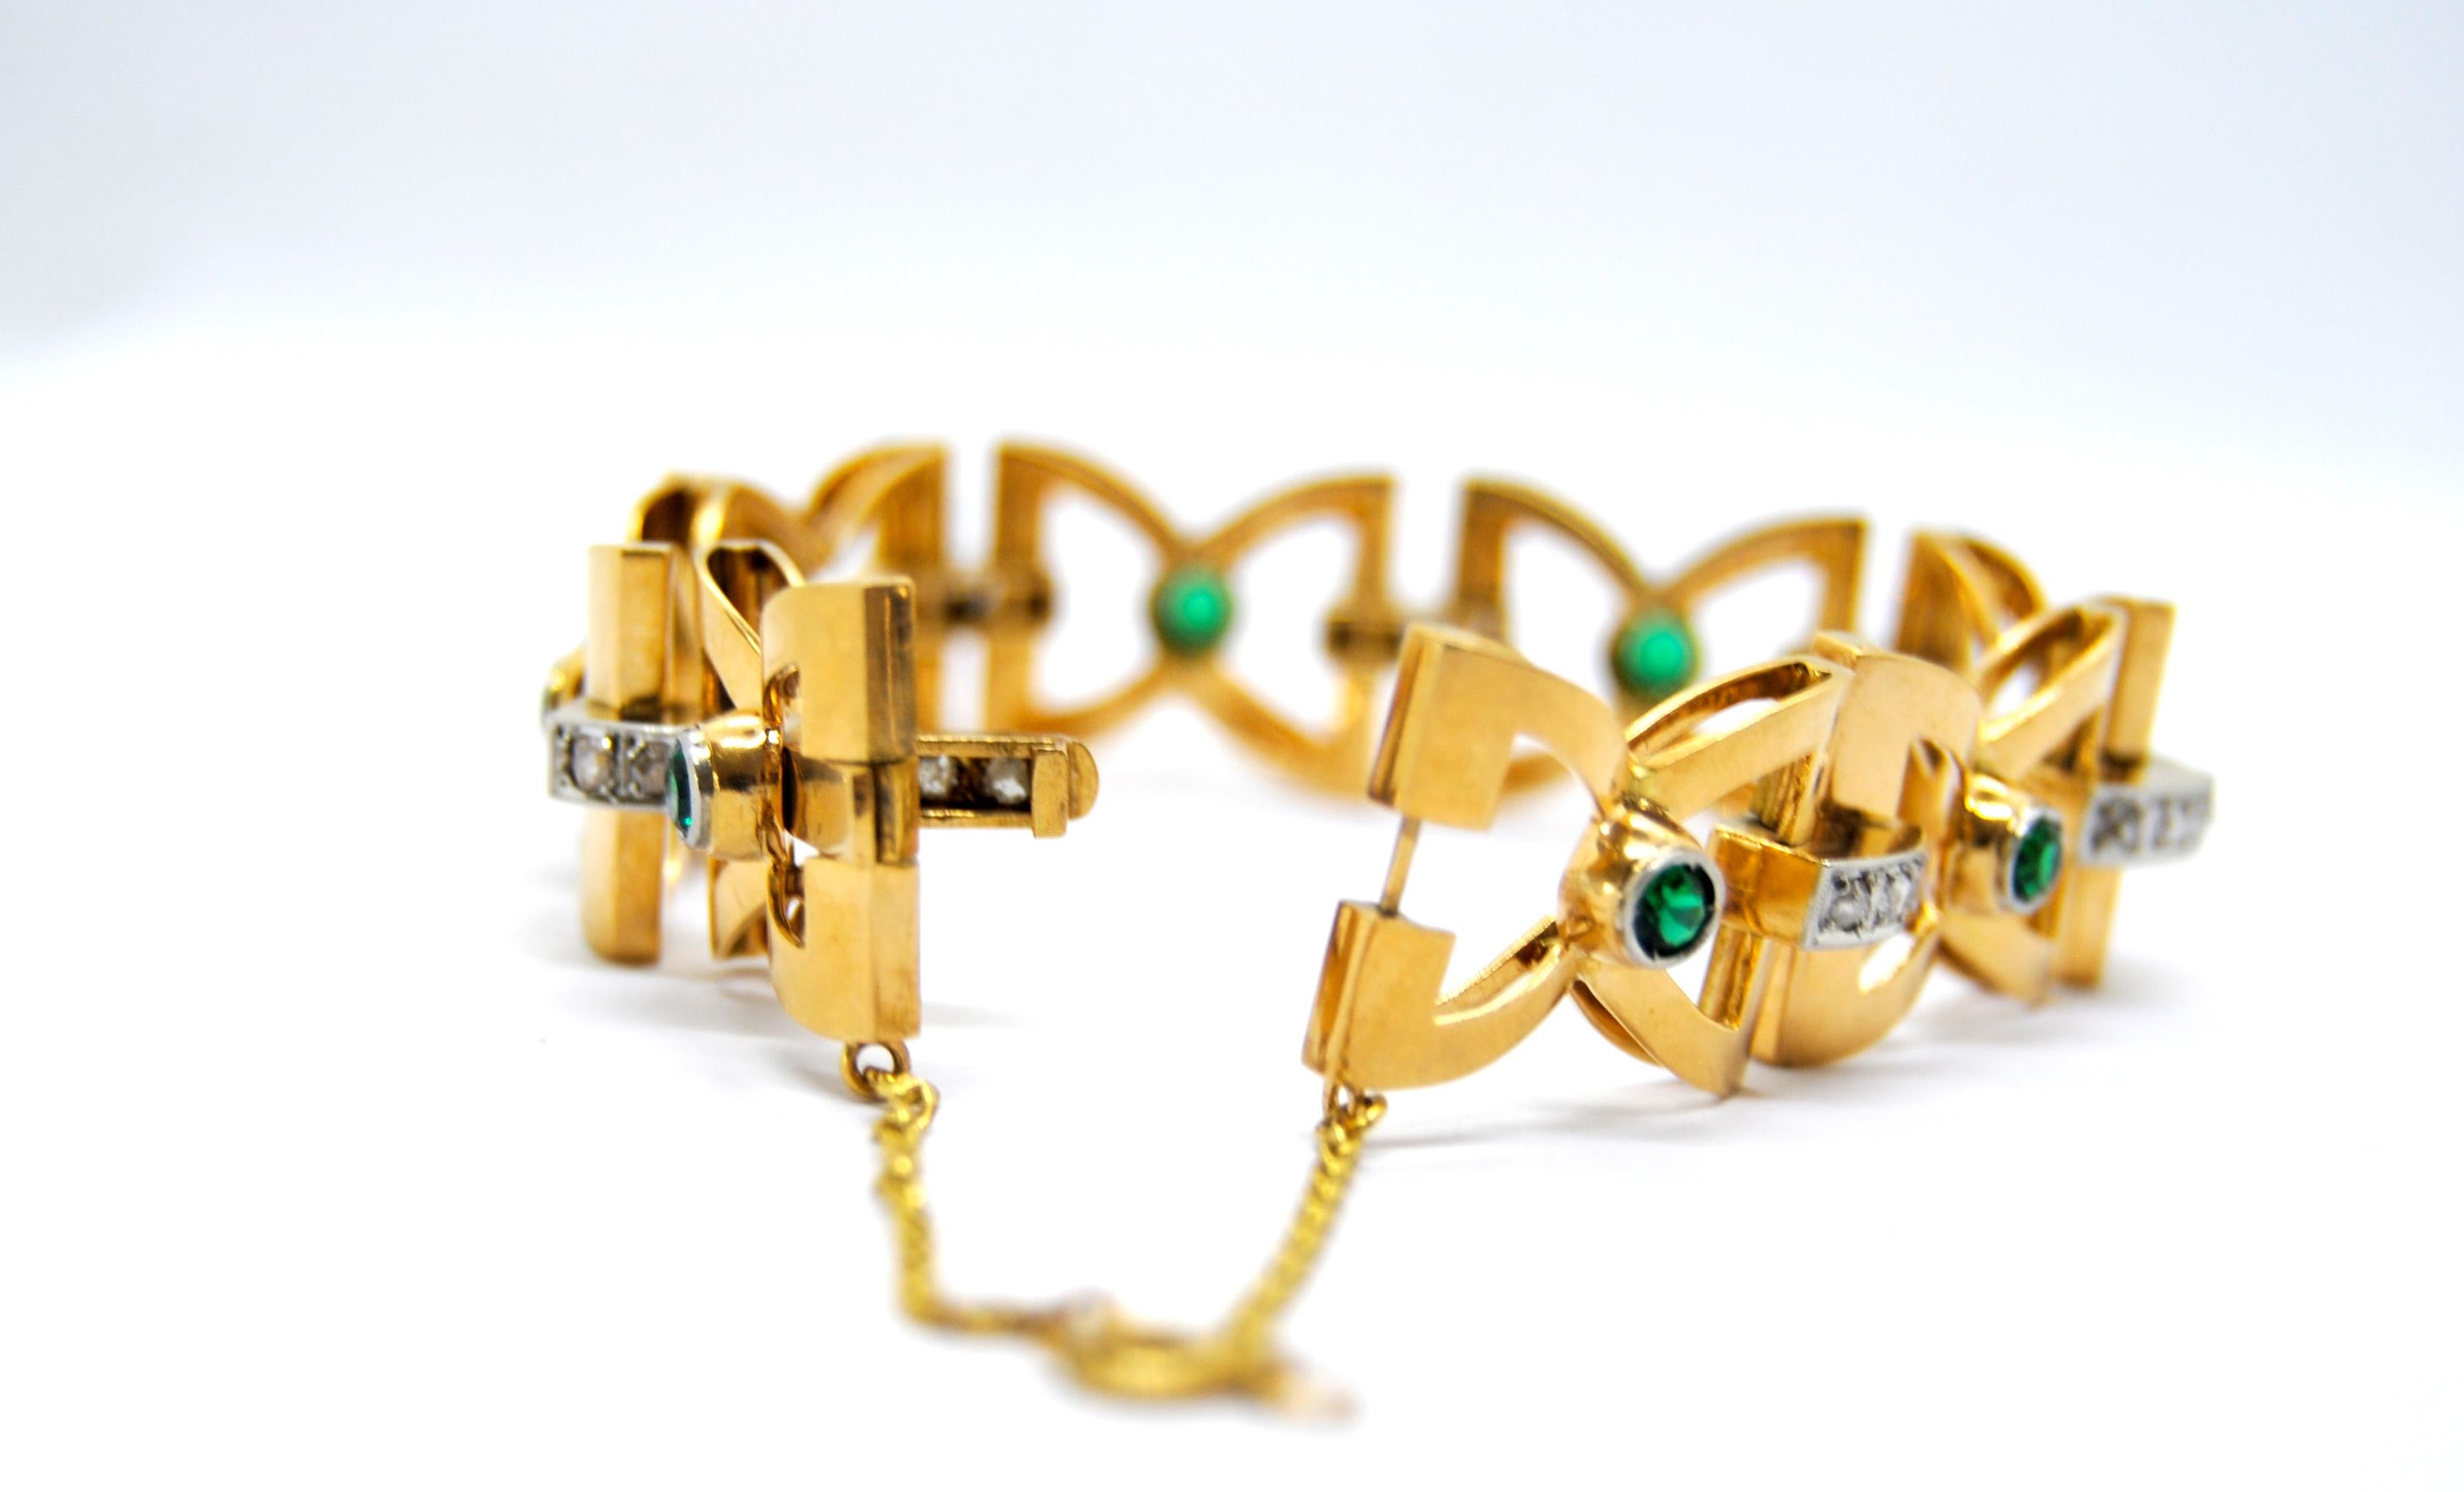 Beautiful Bow-Tie Art Deco  Link Bracelet  18k Yellow Gold Classic 
Very Chic and stylish
24 diamonds of 0.02ct total 0.48ct 
8 Cabouchon Emeralds
Weight 43.6 gr 
Measures 18cm or 7.086inches 
